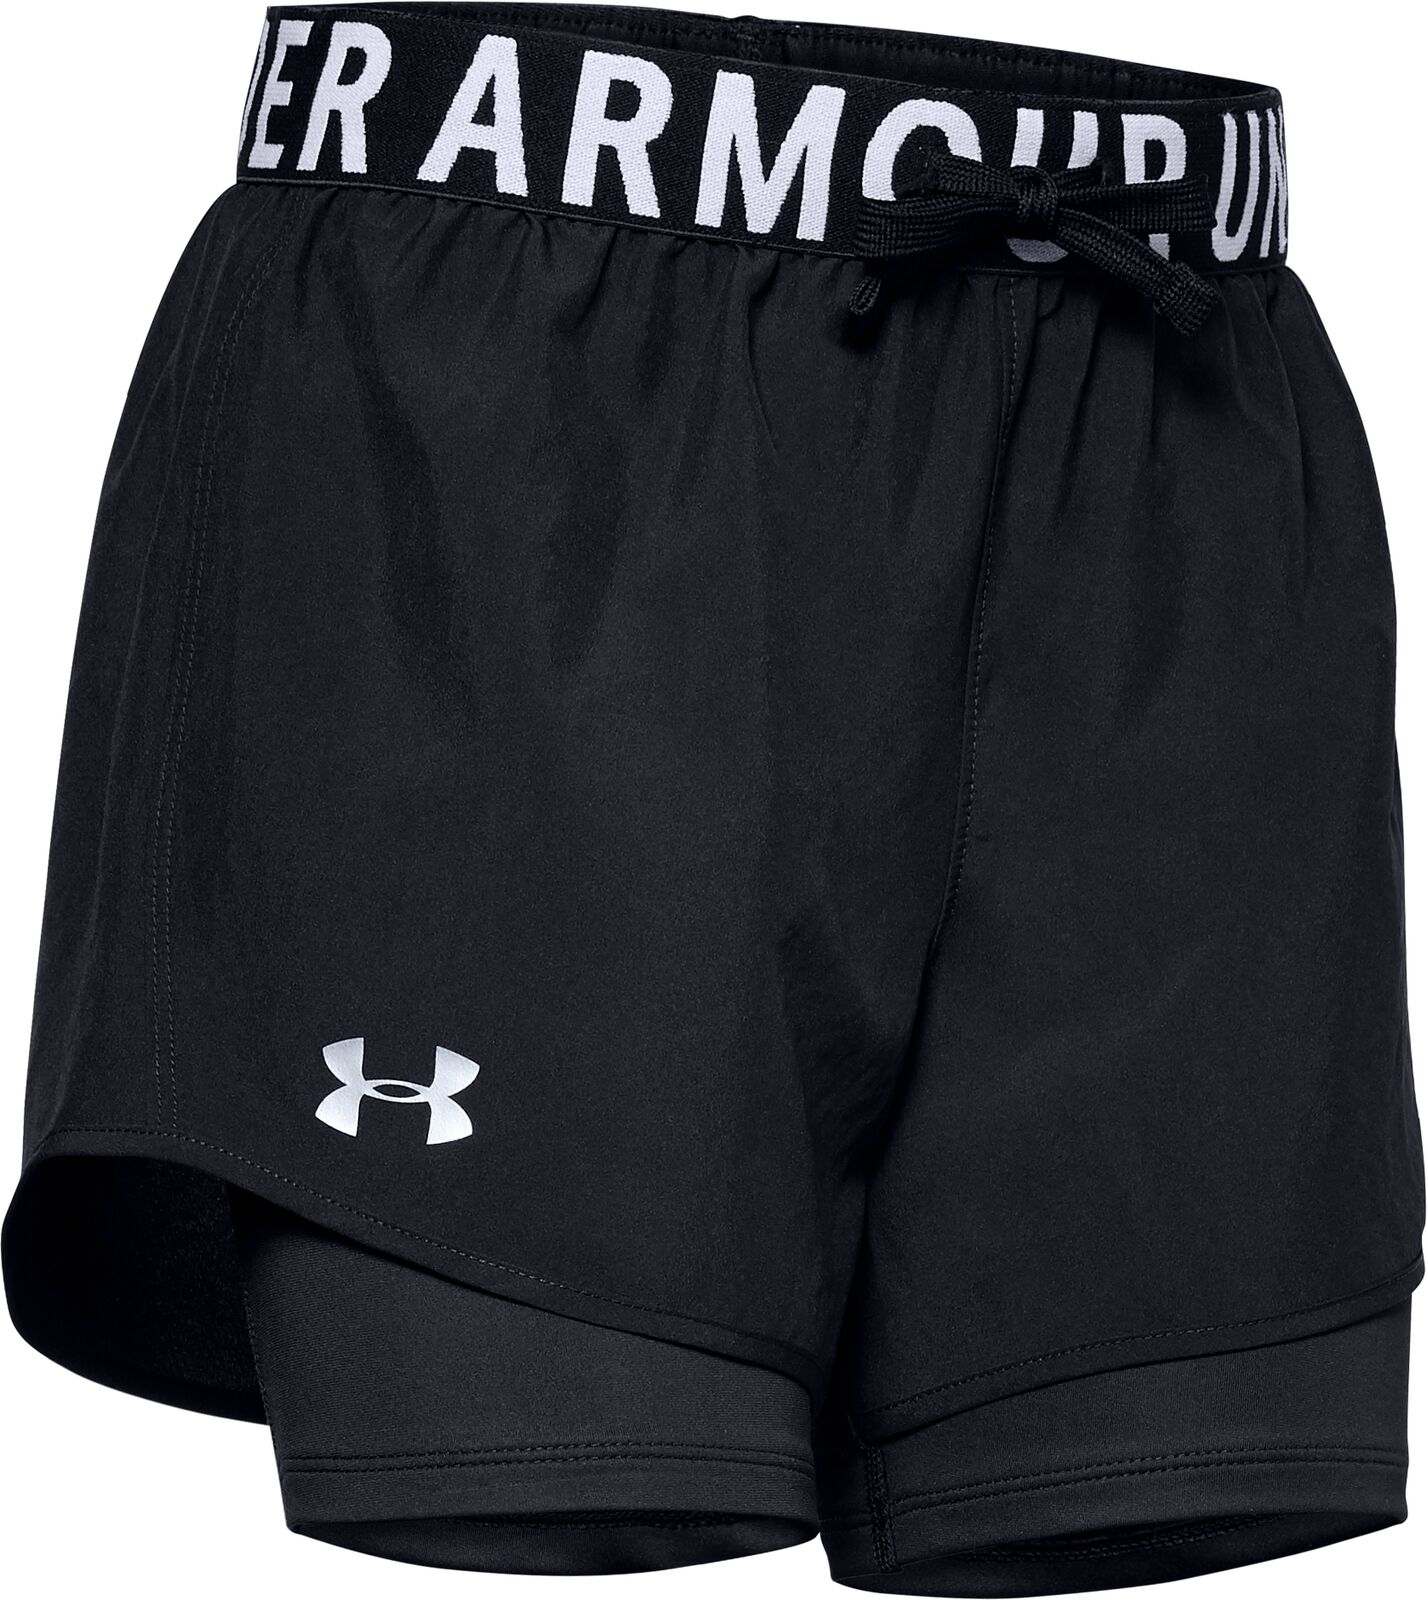 Under Armour Women's Shorts on Sale! Shop here!